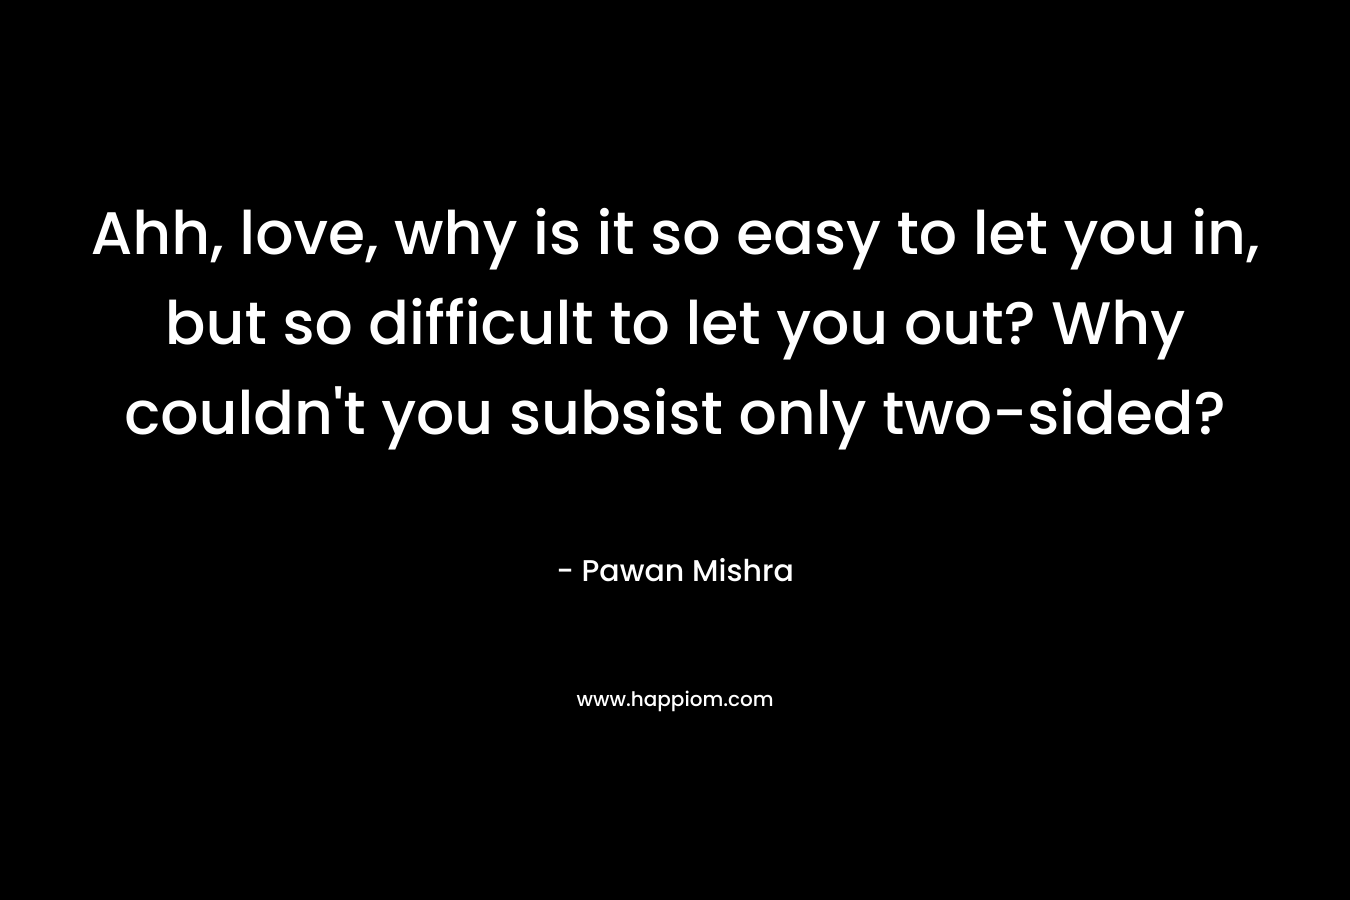 Ahh, love, why is it so easy to let you in, but so difficult to let you out? Why couldn’t you subsist only two-sided? – Pawan Mishra